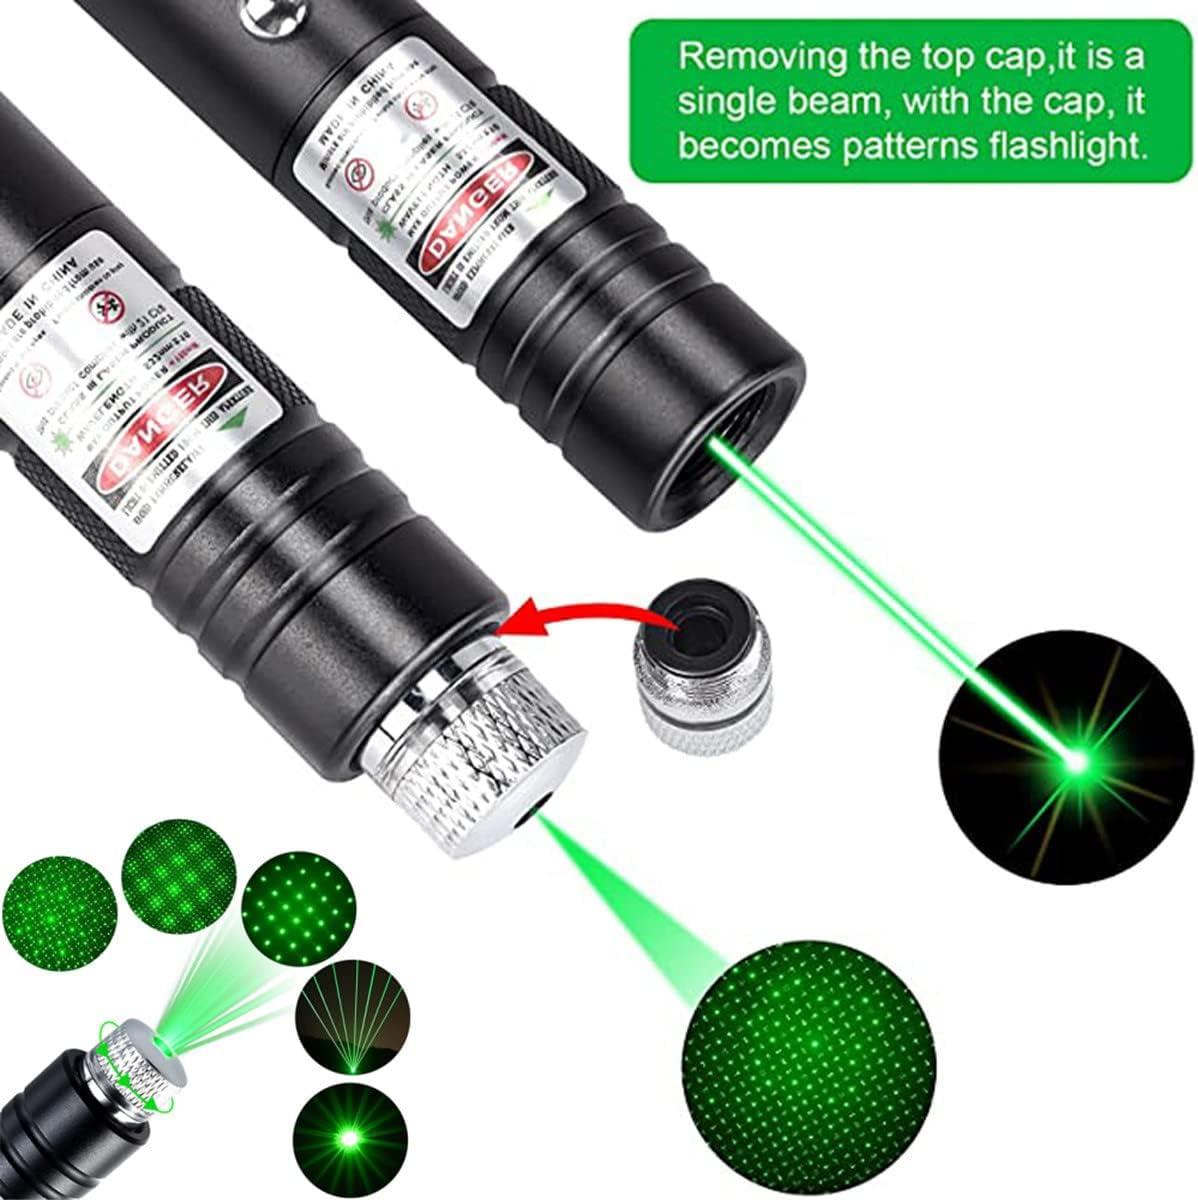  SolidKraft High Power Green Laser Pointer, Tactical Long Range  Laser, Rechargeable Laser Single-Press On/Off, Adjustable Focus High Power Laser  Pointer With Carrying Case : Sports & Outdoors